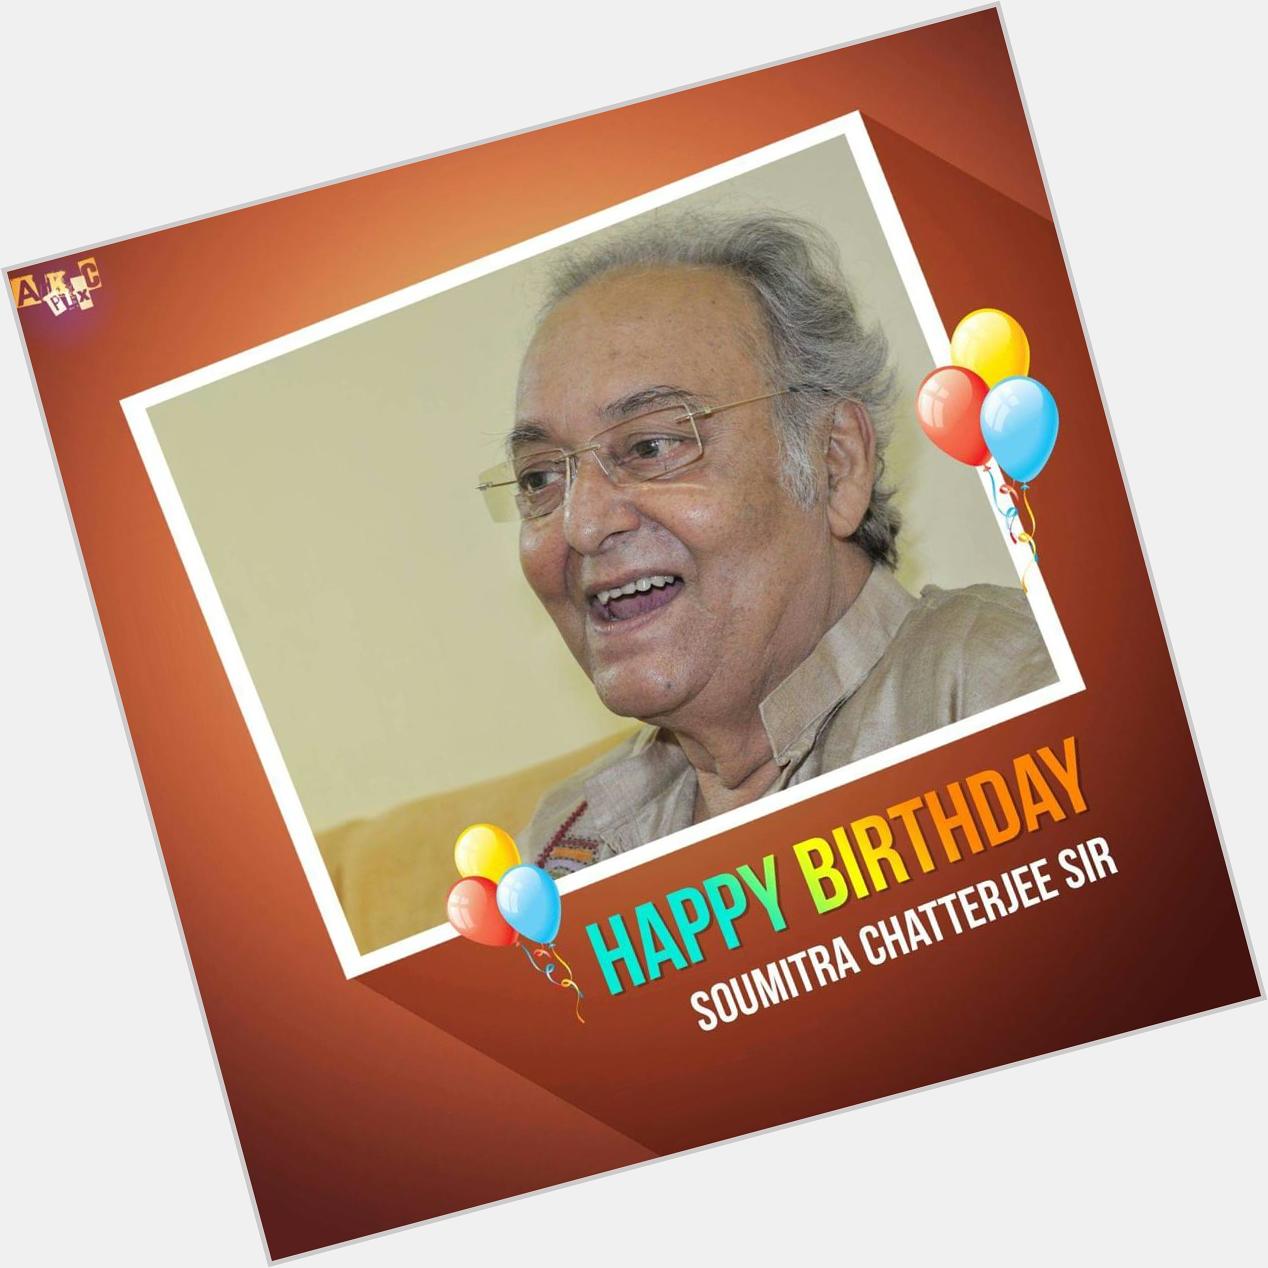 Wishing you a very Happy Birthday Soumitra Chatterjee sir 